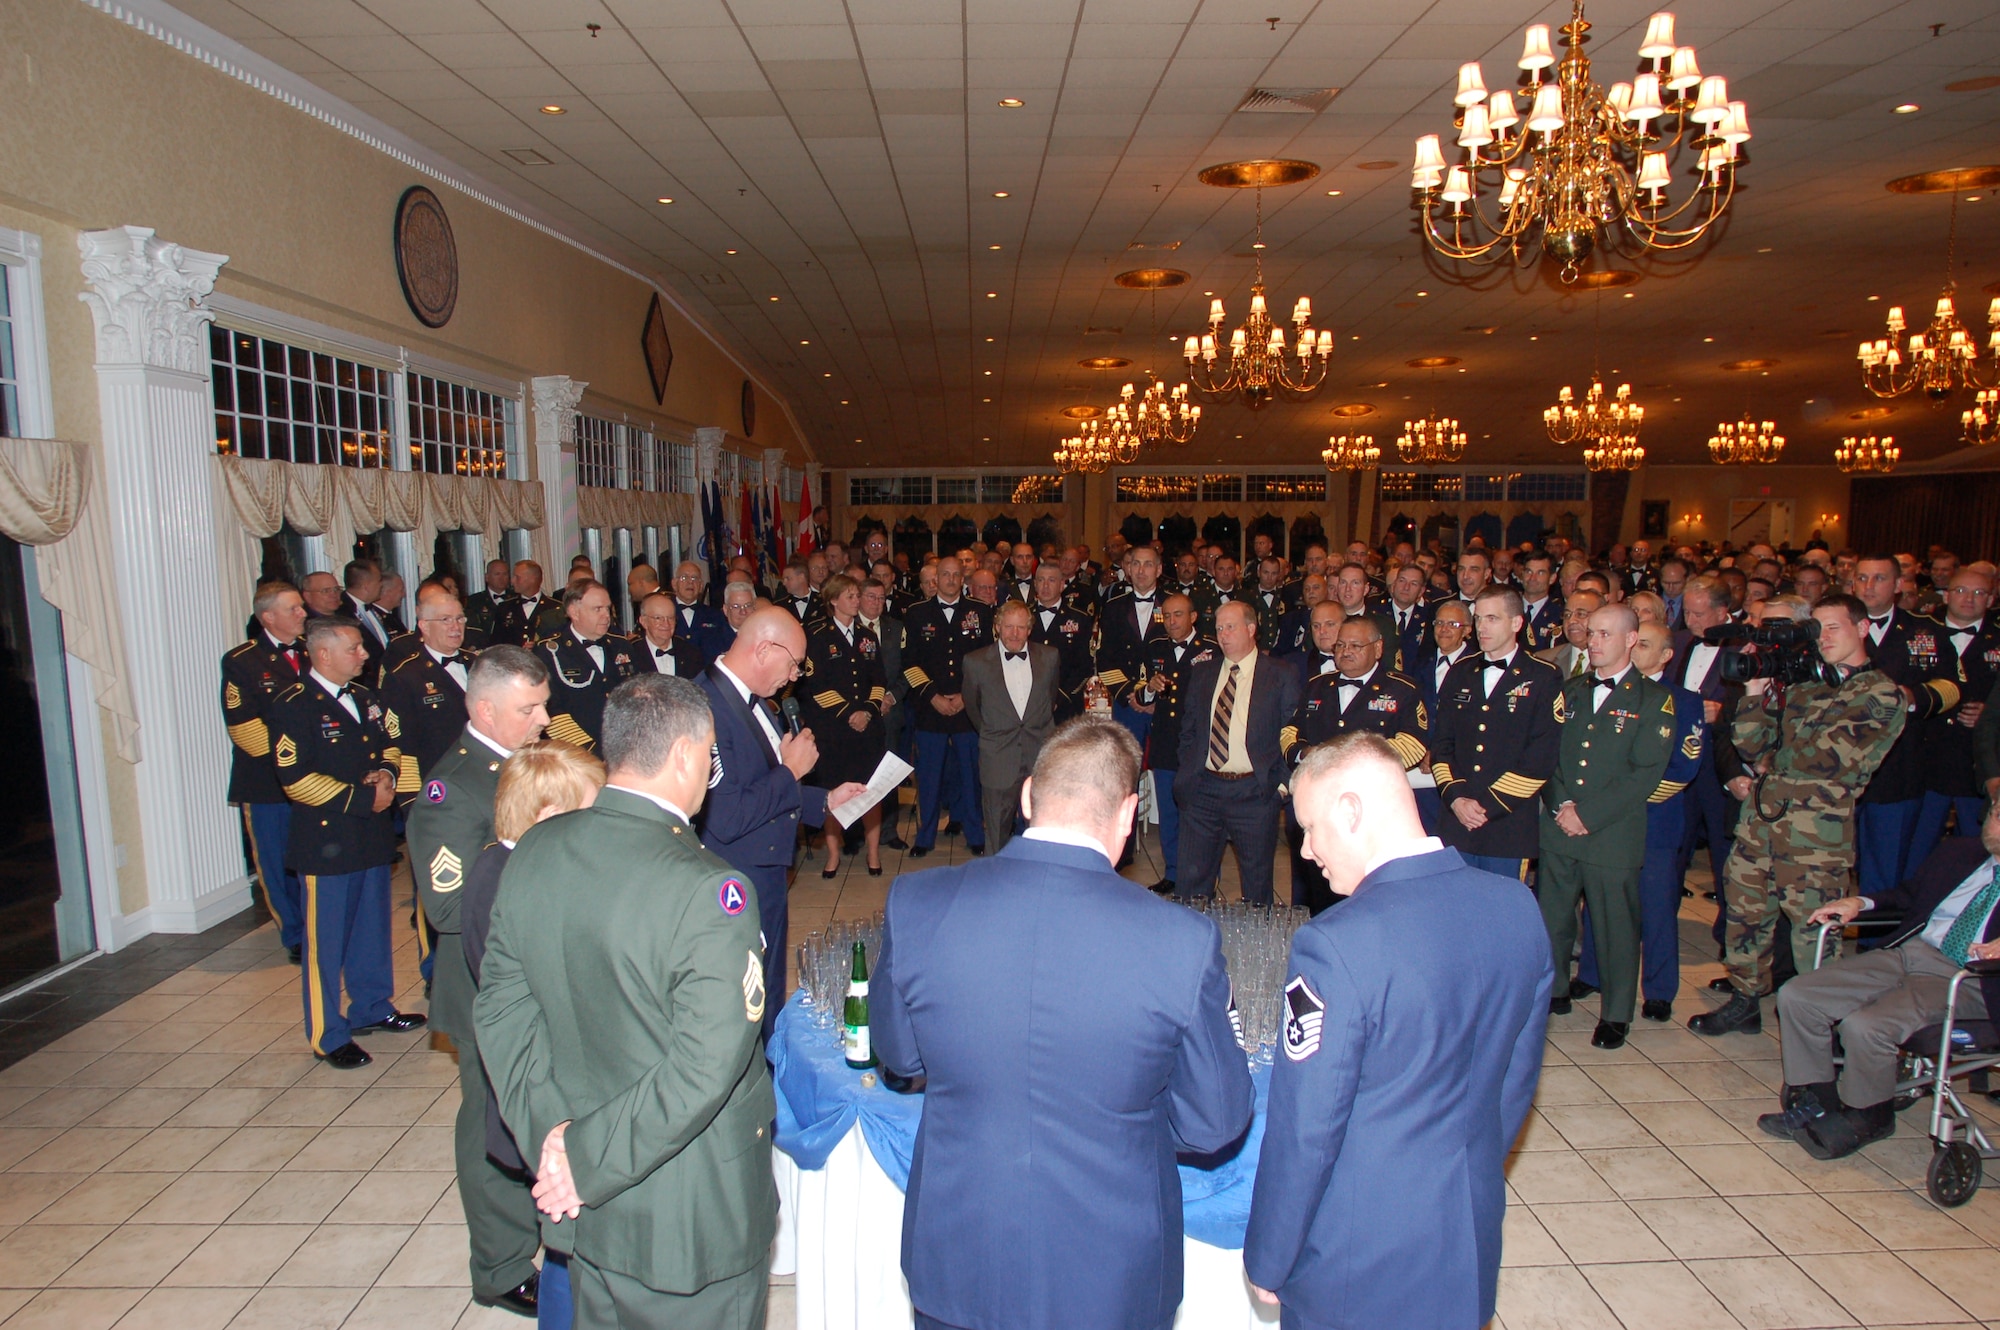 A large group of Army and Air Force Senior Non-Commissioned Officers from the Conn. National Guard gather with retirees and other guests around the “grog bowl” as part of a symbolic ceremony during the Senior NCO Dining-In Oct. 1, 2009, at the Aqua Turf Club in Plantsville, Conn.  Members of the Air National Guard turned out in big numbers for the event, doubling their attendance figure from the year prior.  The event raised almost $4000 for the Junior Enlisted Joint Combat Dining-In Fund.  (U.S. Air Force Photo by Capt. Jefferson S. Heiland) 